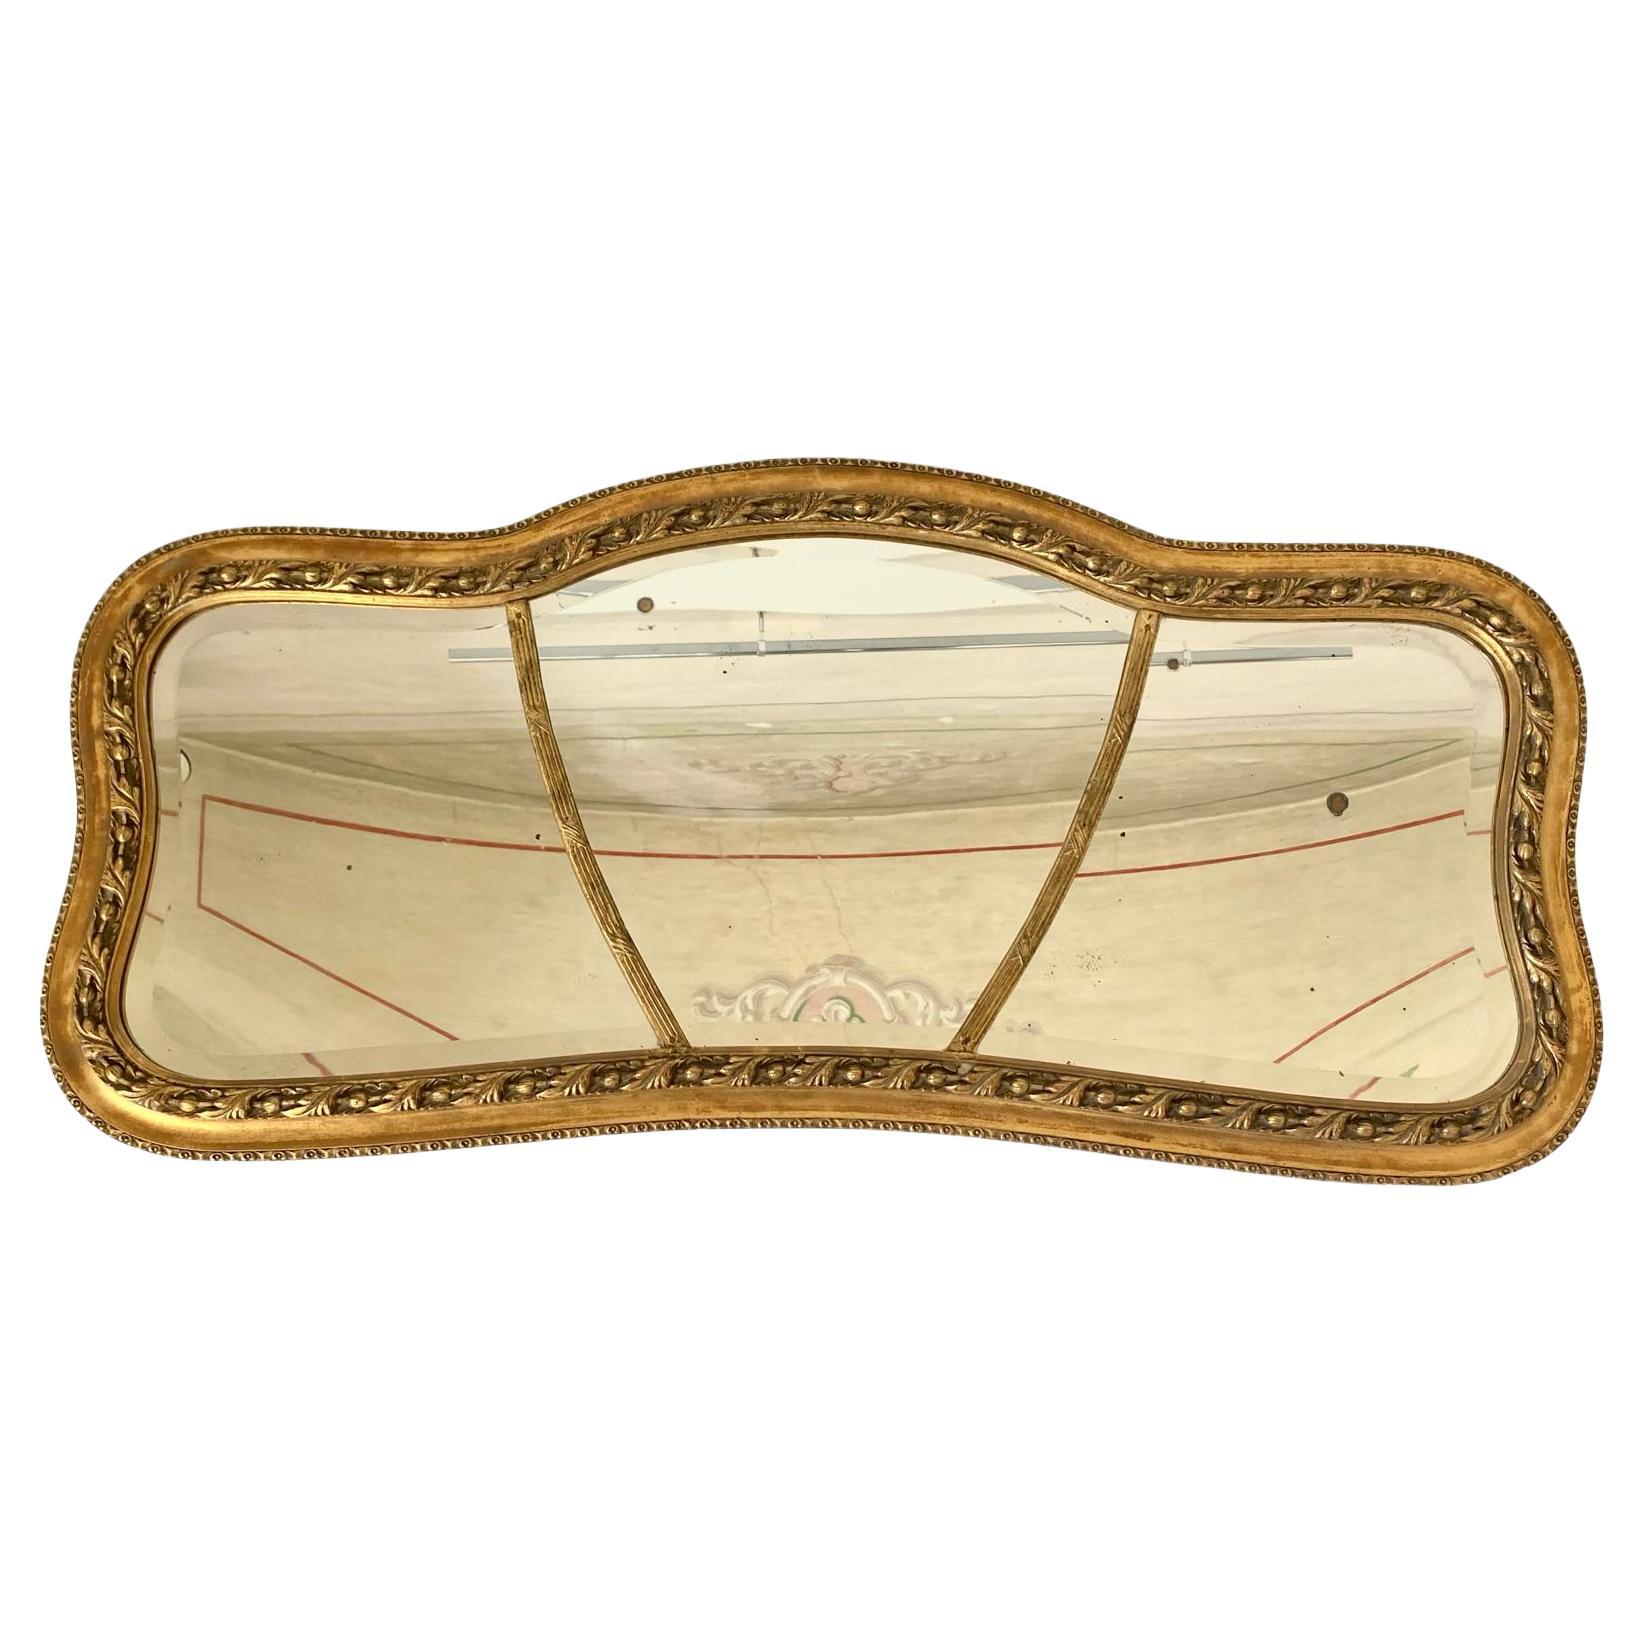 Antique gold Mirror, Italy 1850s.
A rare 19th century gold leaf rectangular mirror with classy refined frame.
The mirror is made of a solid wood frame with gold leaf finishing and finely refined with elegant details. 

Original cut glass mirror with